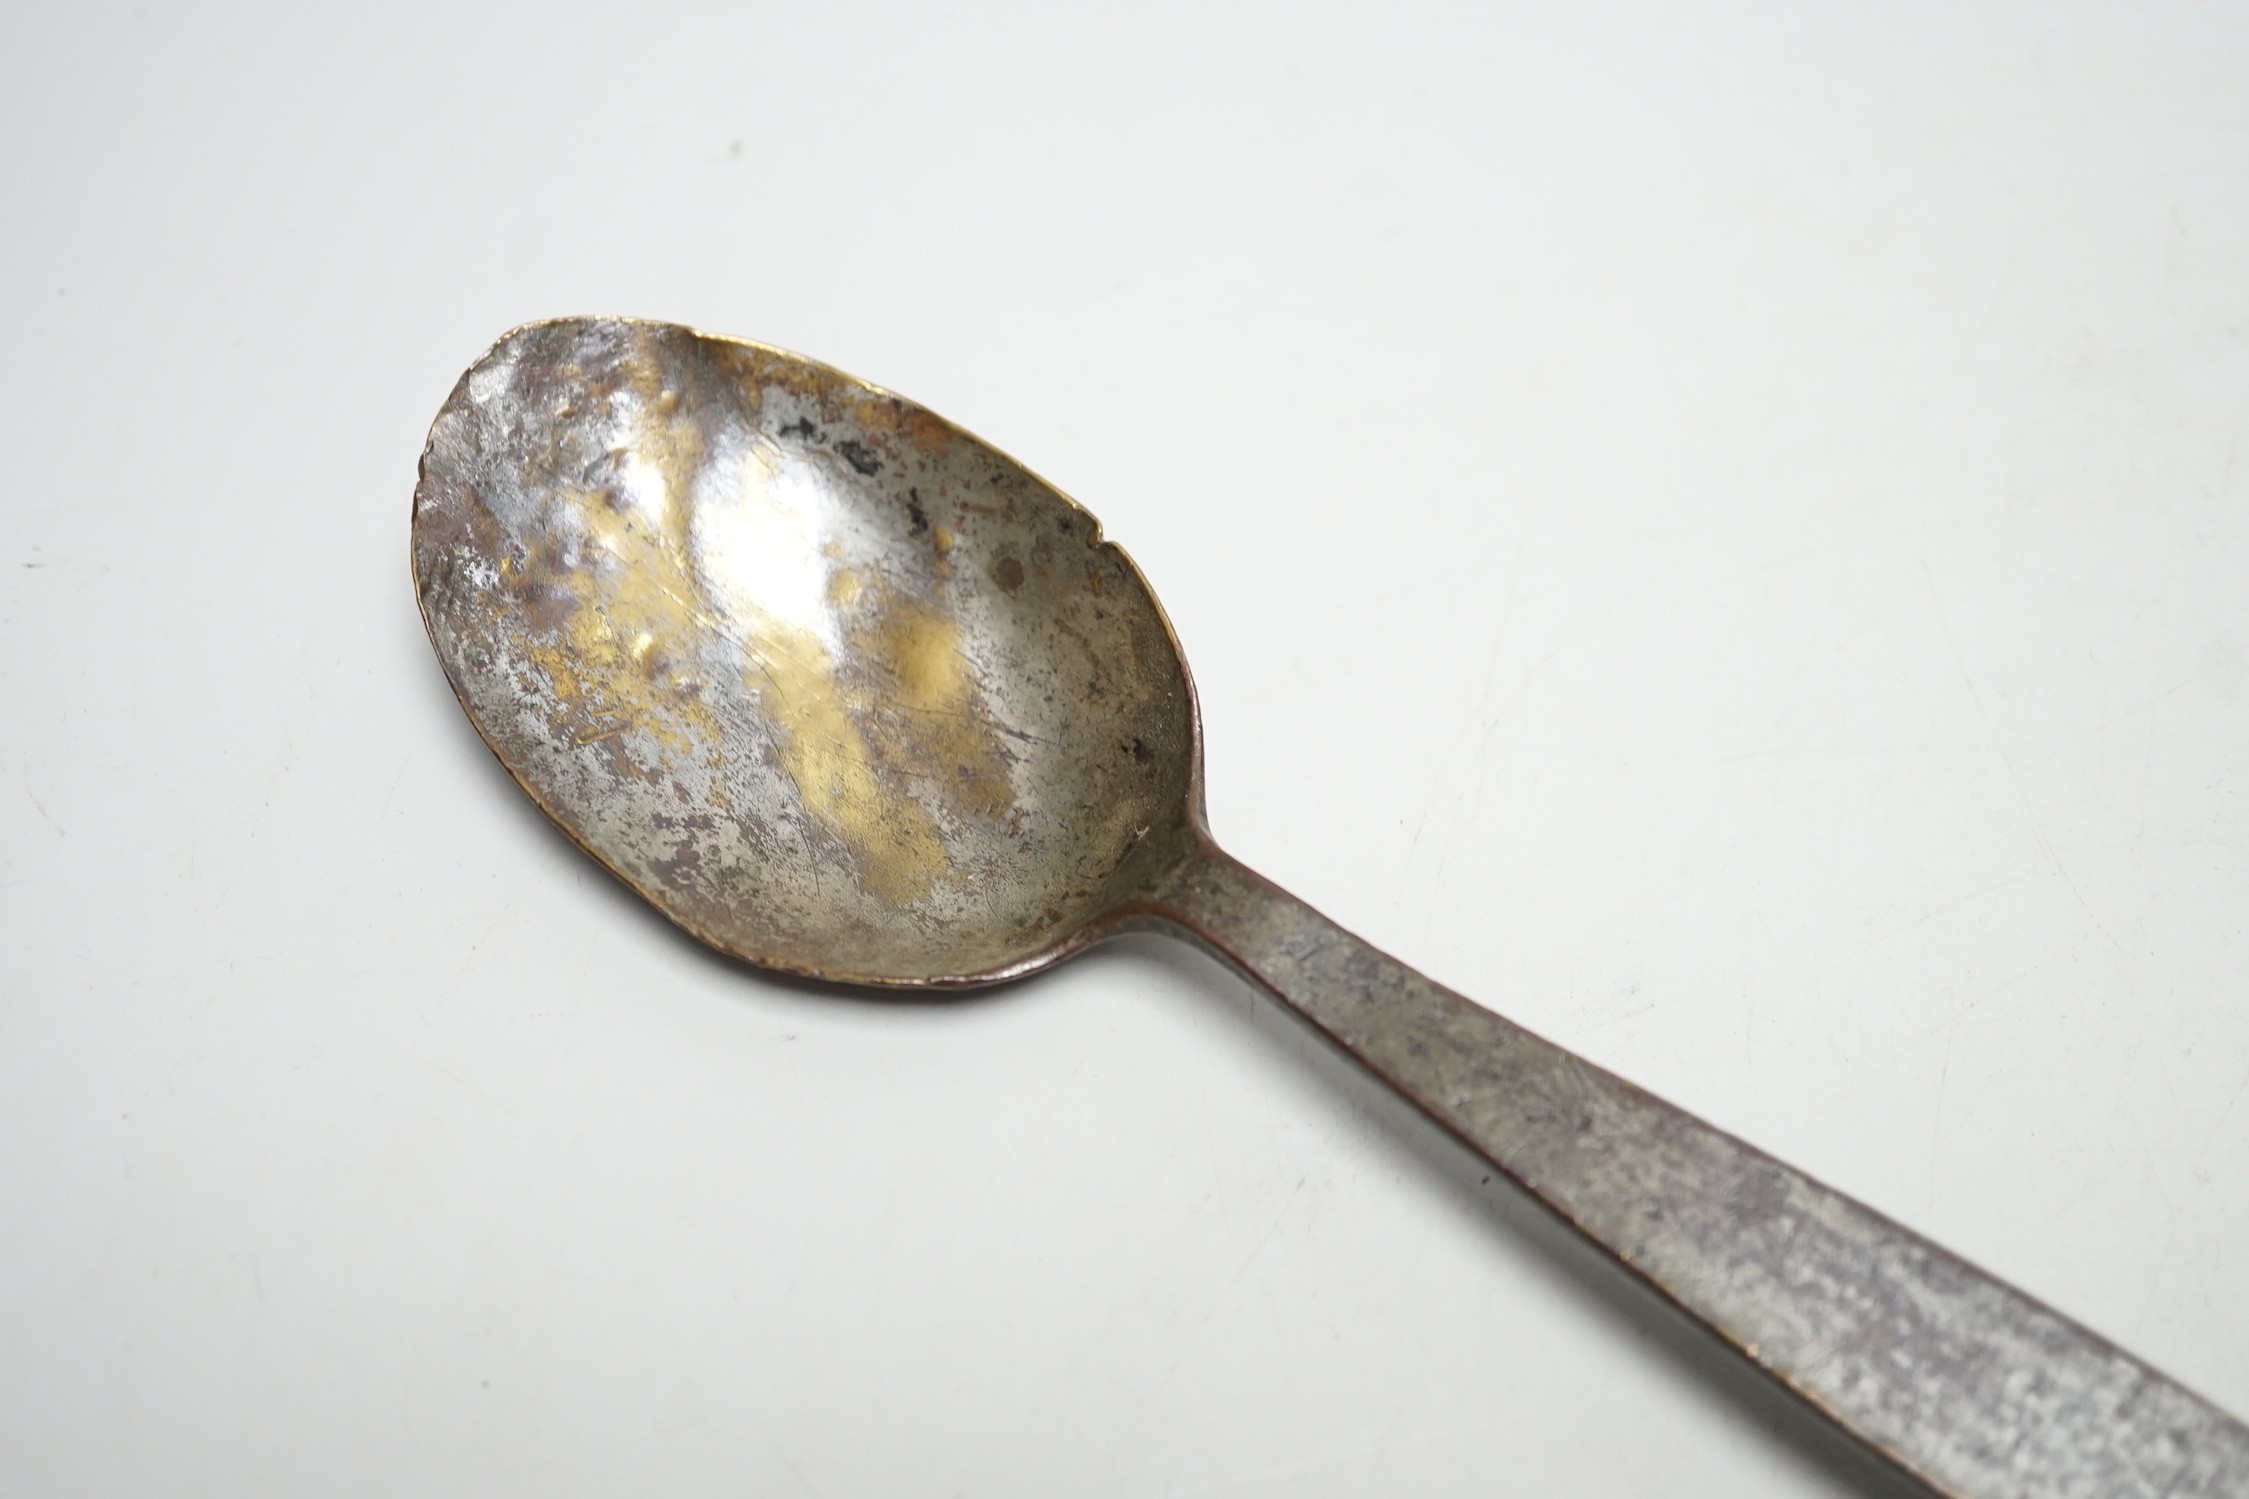 A large and unusual 19th century combined workman’s spoon / fork, 34.5cm